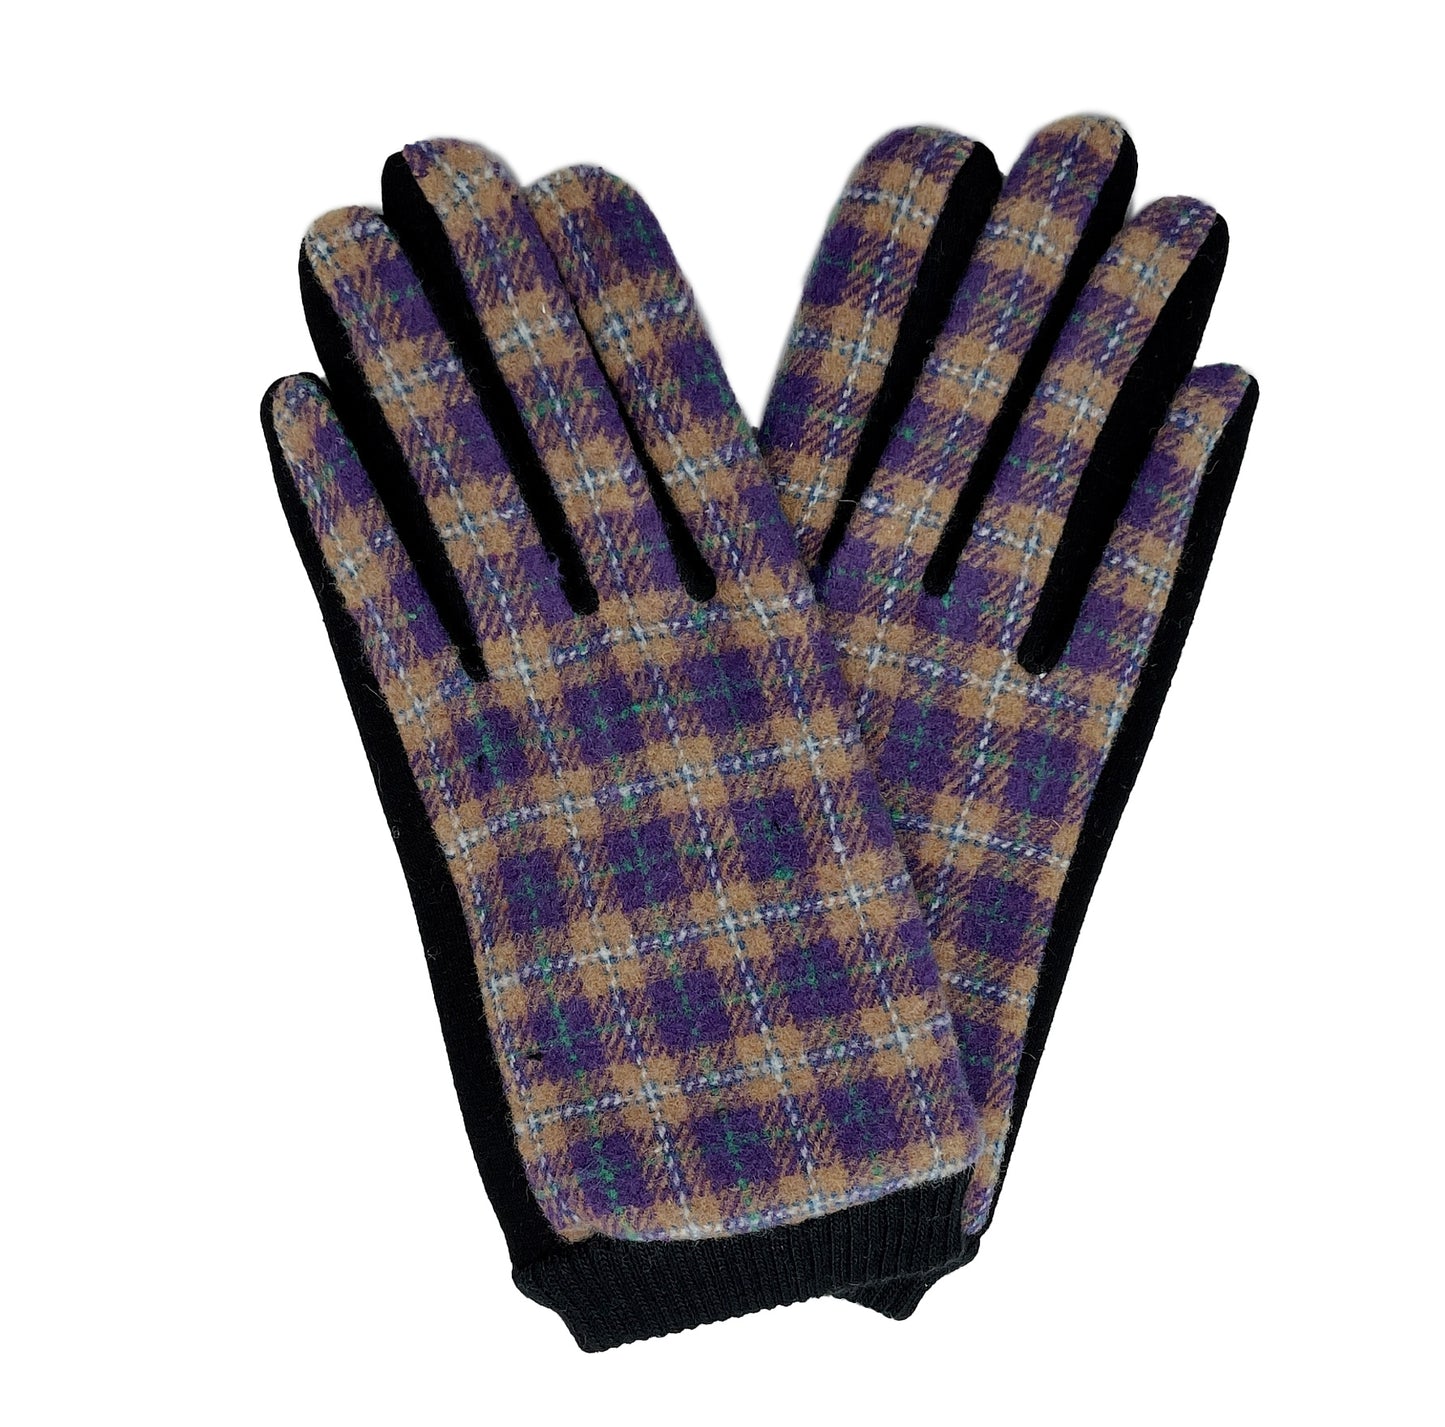 Shop for KW Fashion Plaid  Touch Gloves at doeverythinginloveny.com wholesale fashion accessories